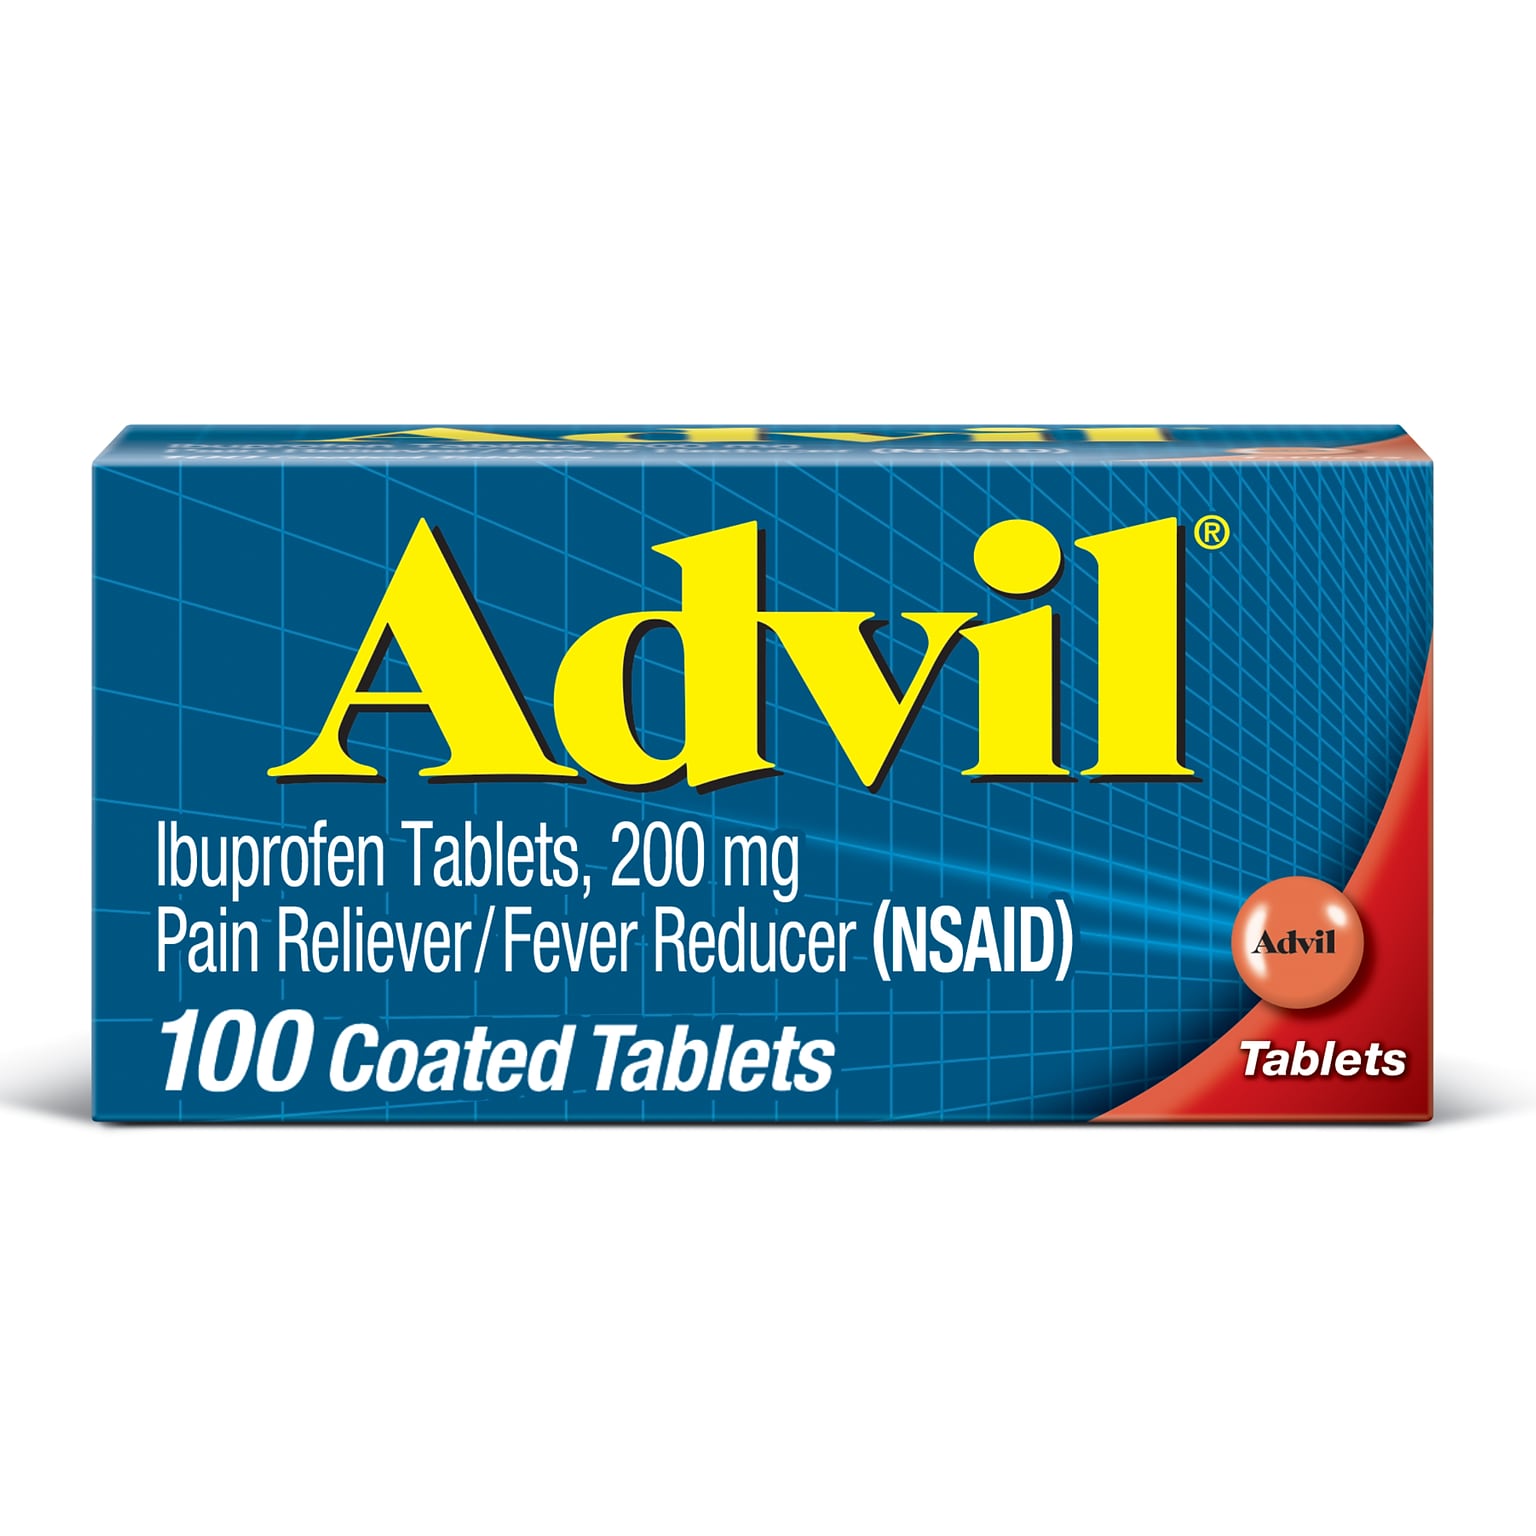 Advil Ibuprofen Pain Reliever/Fever Reducer, 200mg, 100/Box (015040)